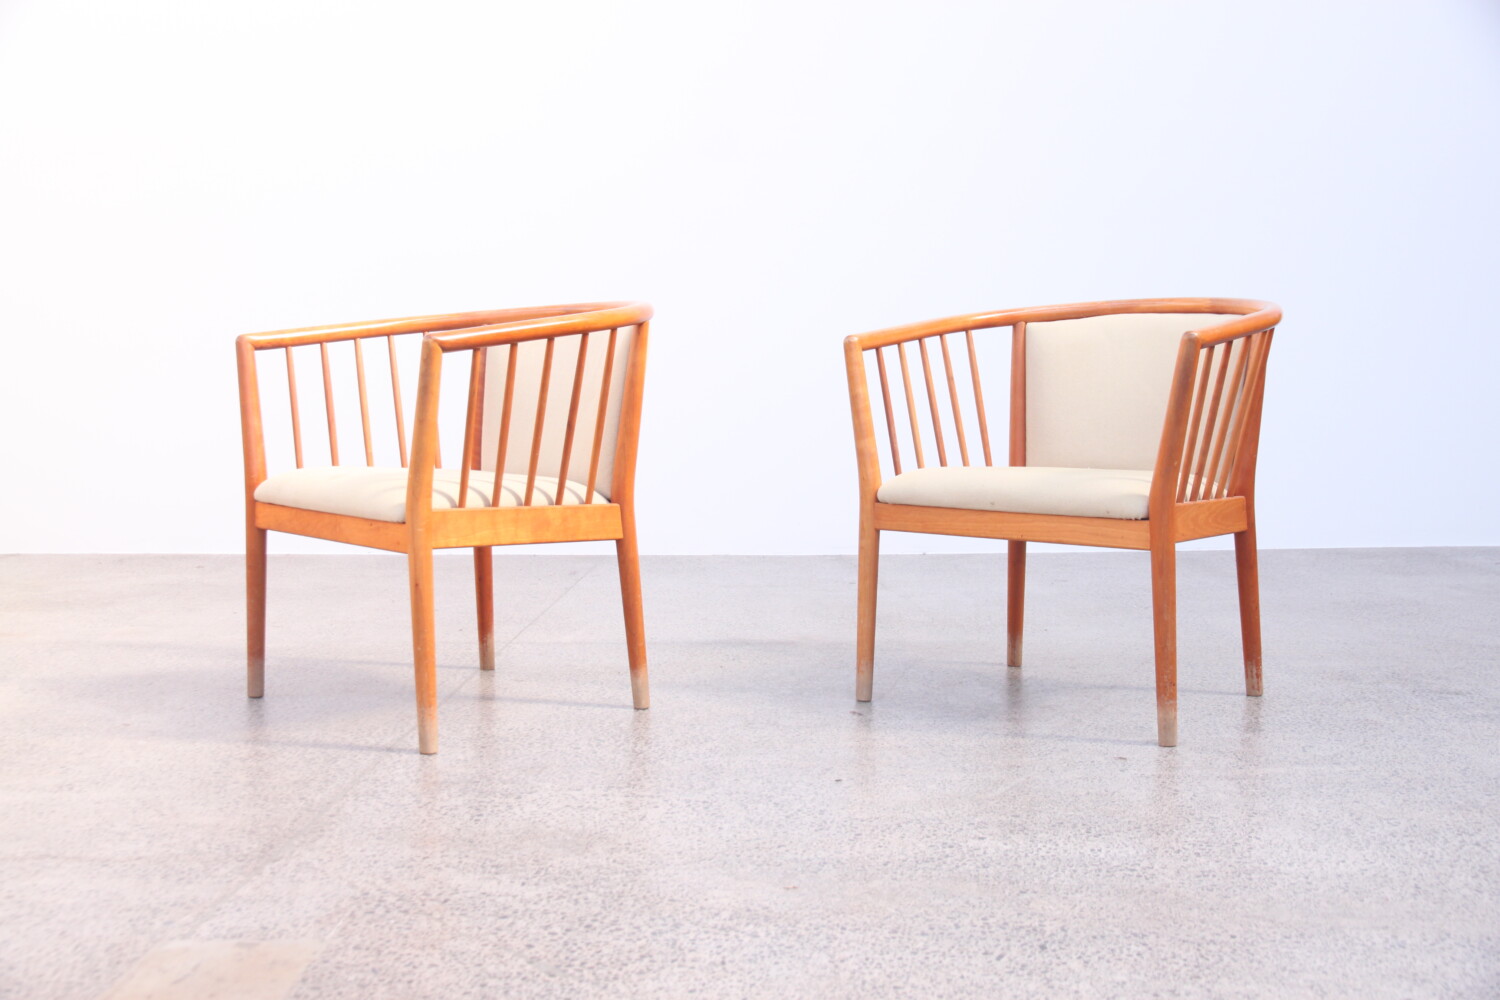 Pair of Armchairs by Finn Ostergaard sold